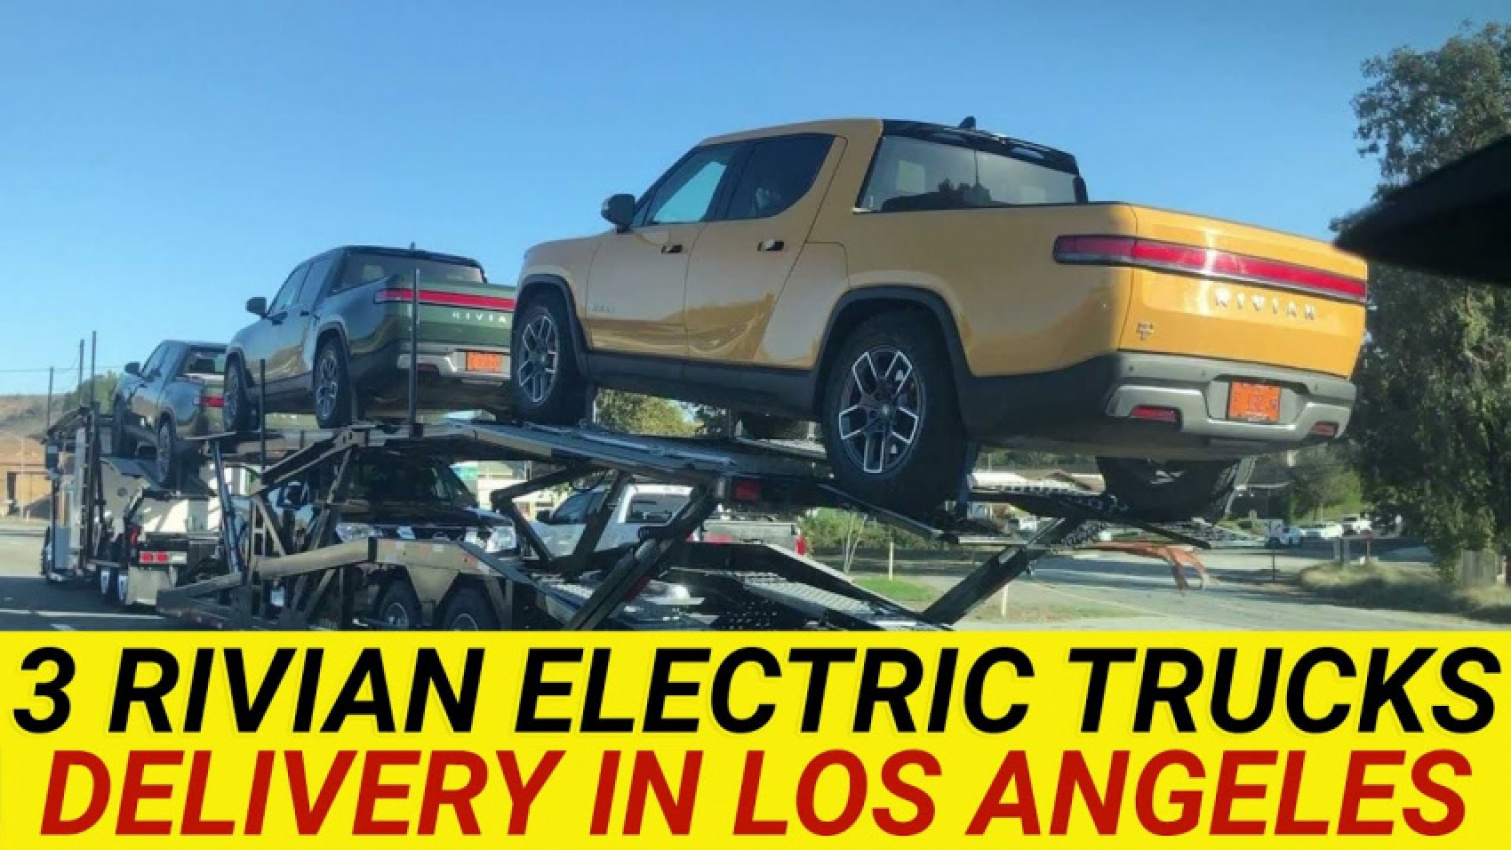 auto, autos, cars, rivian, 2021 rivian r1t, 2021 rivian r1t production, amazon, amazon electric truck rivian, electric truck rivian, rivian electric truck, rivian ipo, rivian r1s, rivian r1t, rivian r1t off road, rivian r1t offroad, rivian r1t pickup, rivian r1t review, rivian review, rivian stock, rivian stock news, rivian stock predictions, rivian stock price, rivian stock price prediction 2025, rivian stock review, rivian stories, rivian suv, rivian truck, rivian truck review, rivian vs tesla, amazon, rivian r1t electric truck review | out on delivery in los angeles | should you buy rivian stock?